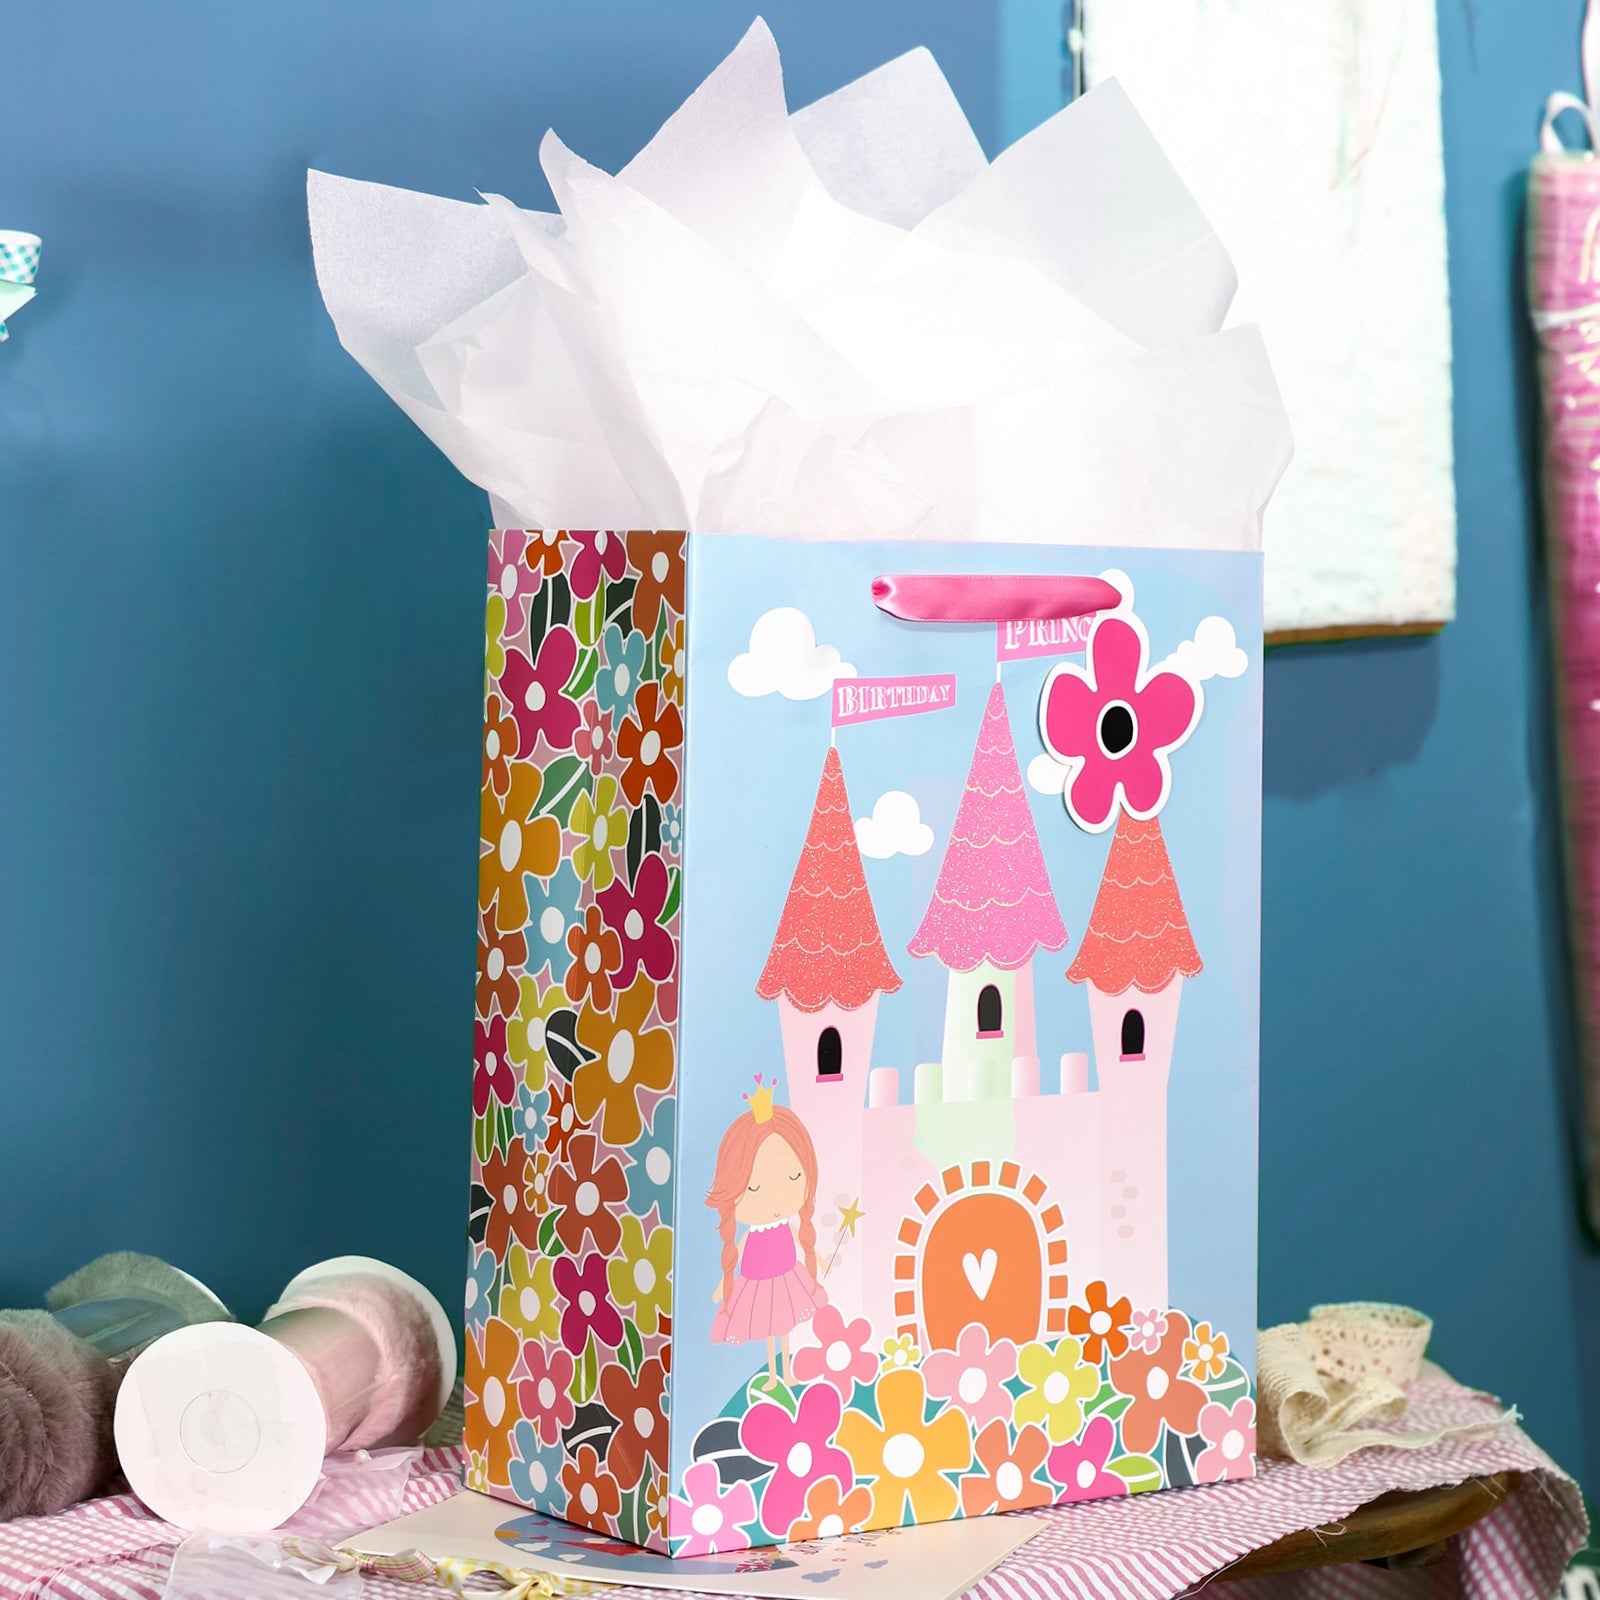 13 inch Large Gift Bag with Birthday Card  & Tissue Paper for Girls